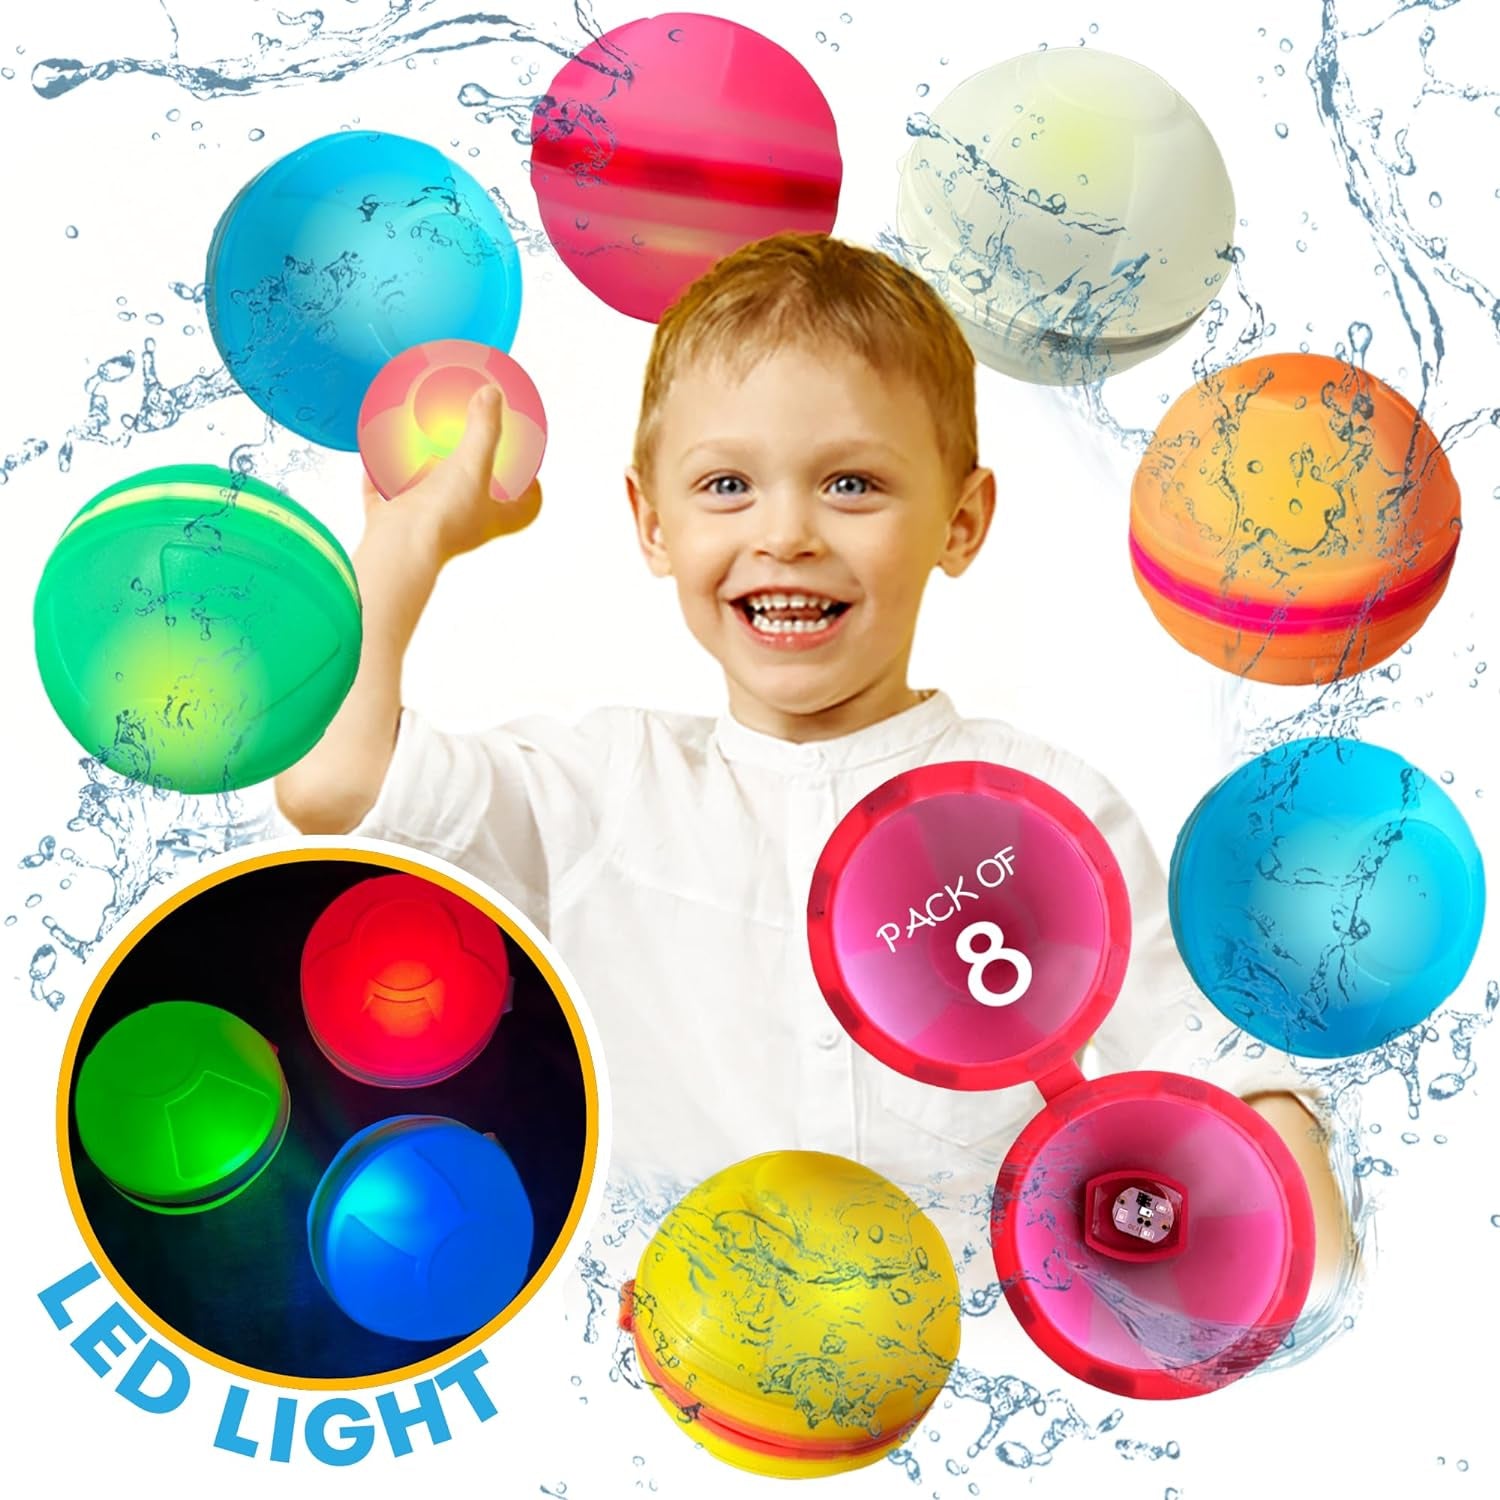 Reusable Water Balloons for Kids, Water Balloons Quick Fill, Refillable Water Balloons for Kids, Reusable Water Balloons Magnetic, Reuse Water Balloons, Silicone (12) (Regular)